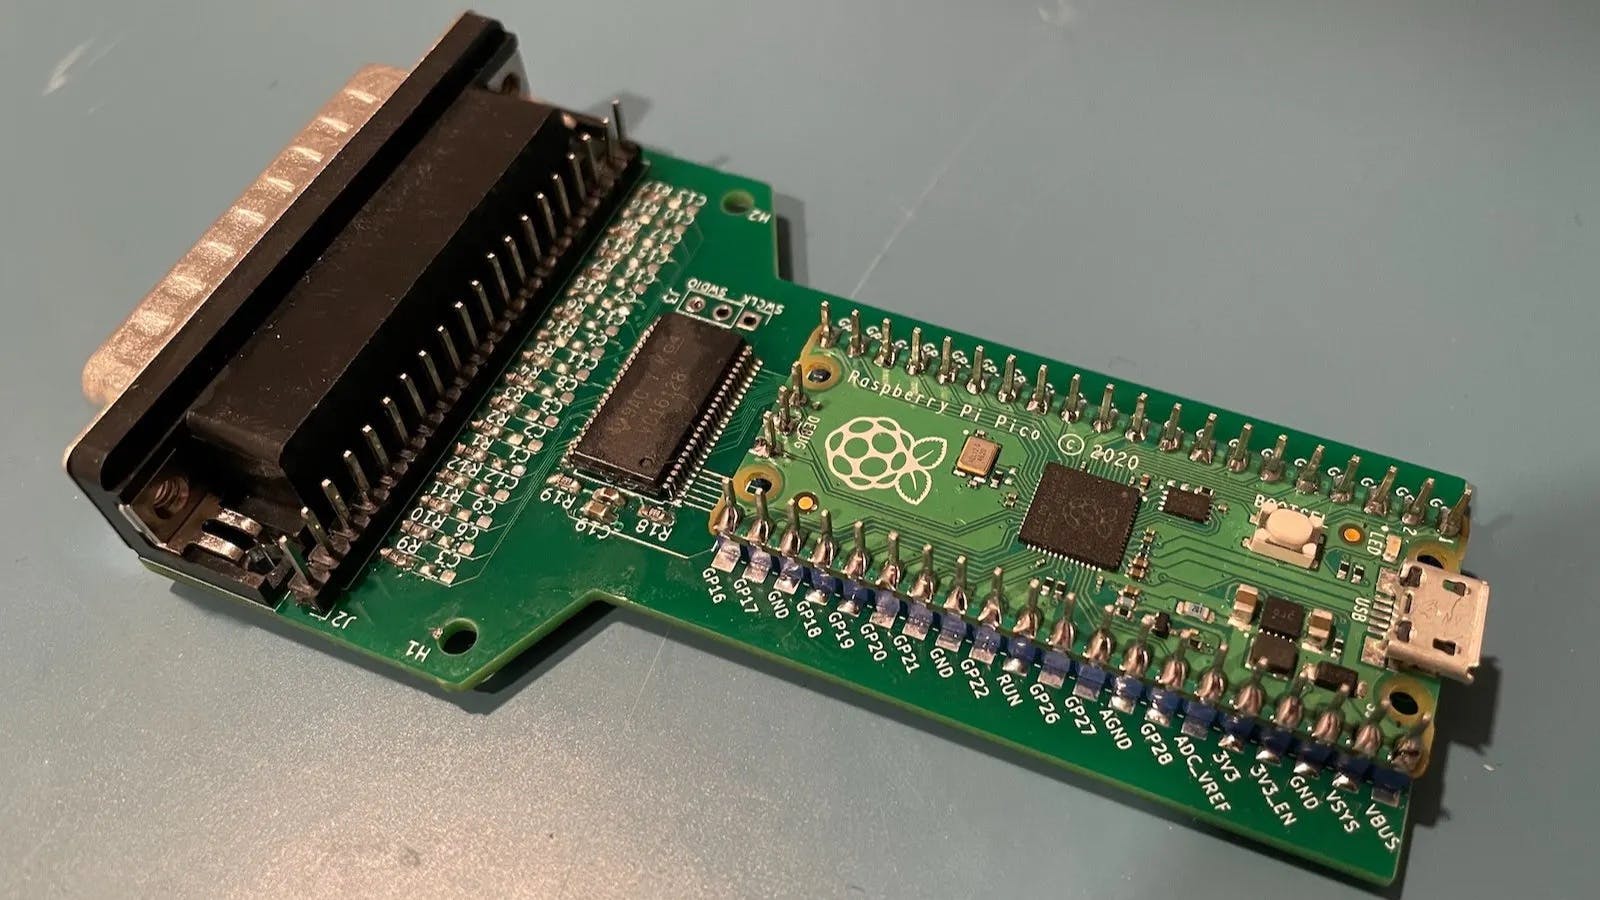 Capture Screenshots on Test with This Parallel Port Hack Hackster.io